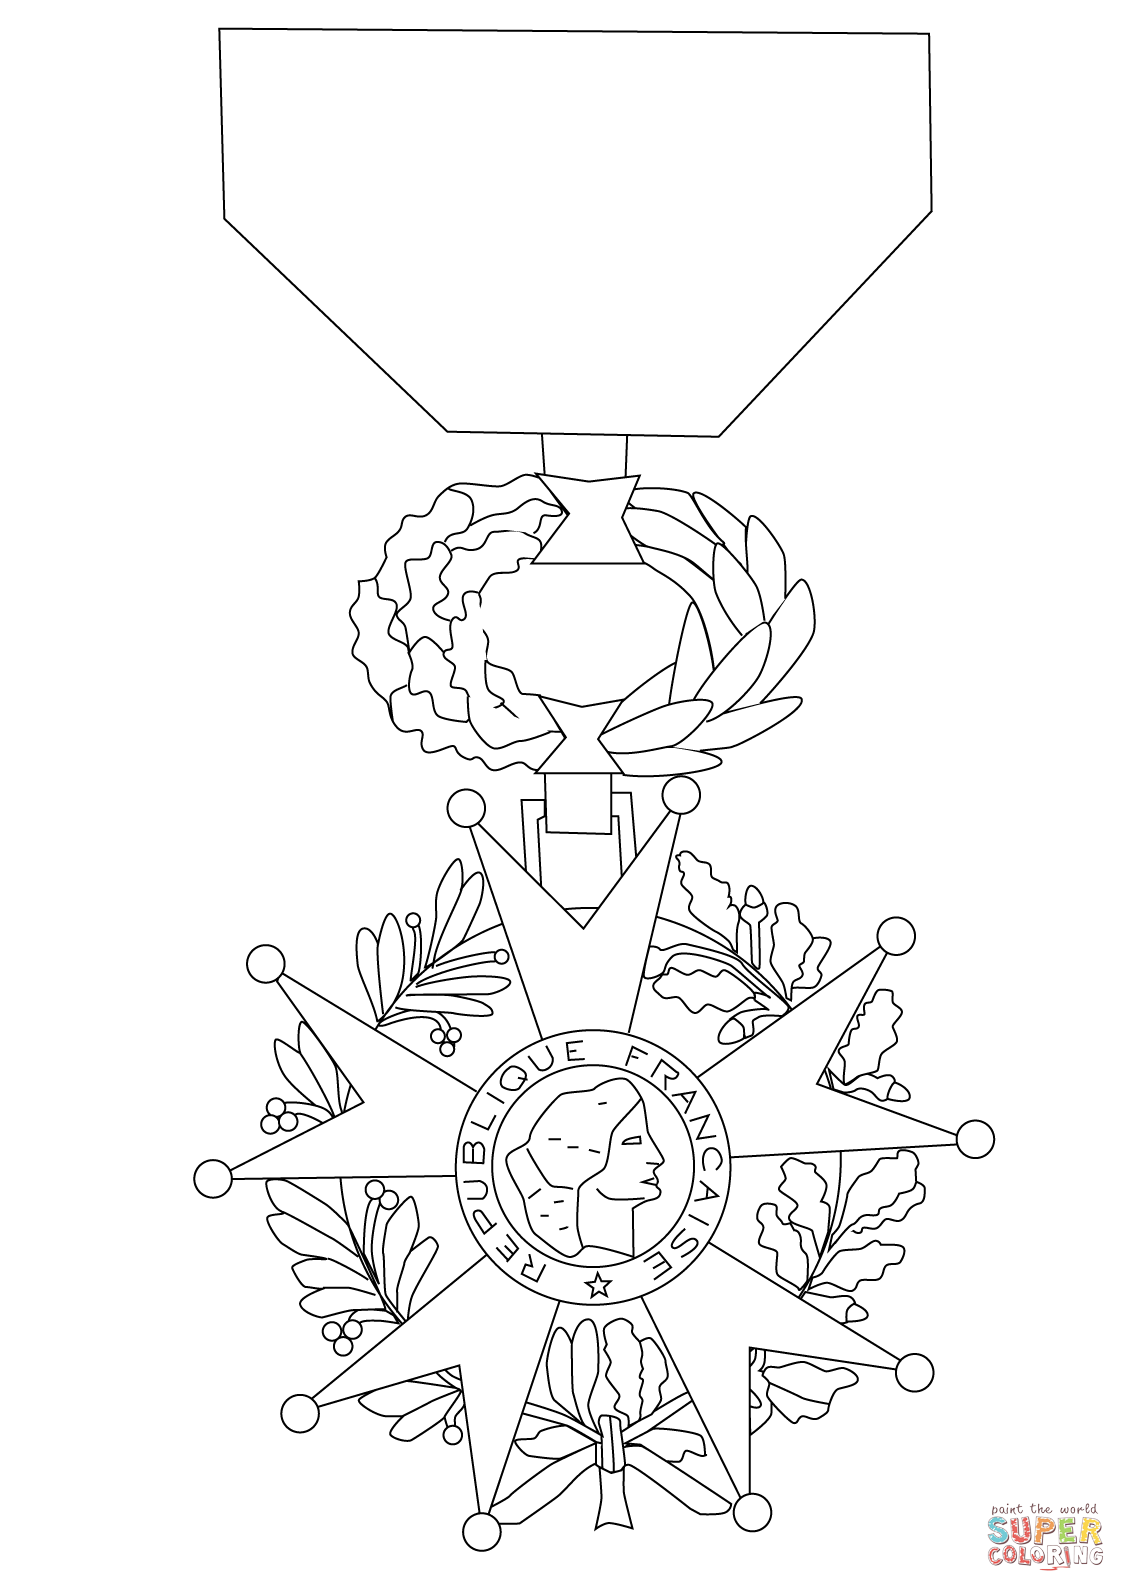 Medal of the legion of honor coloring page free printable coloring pages